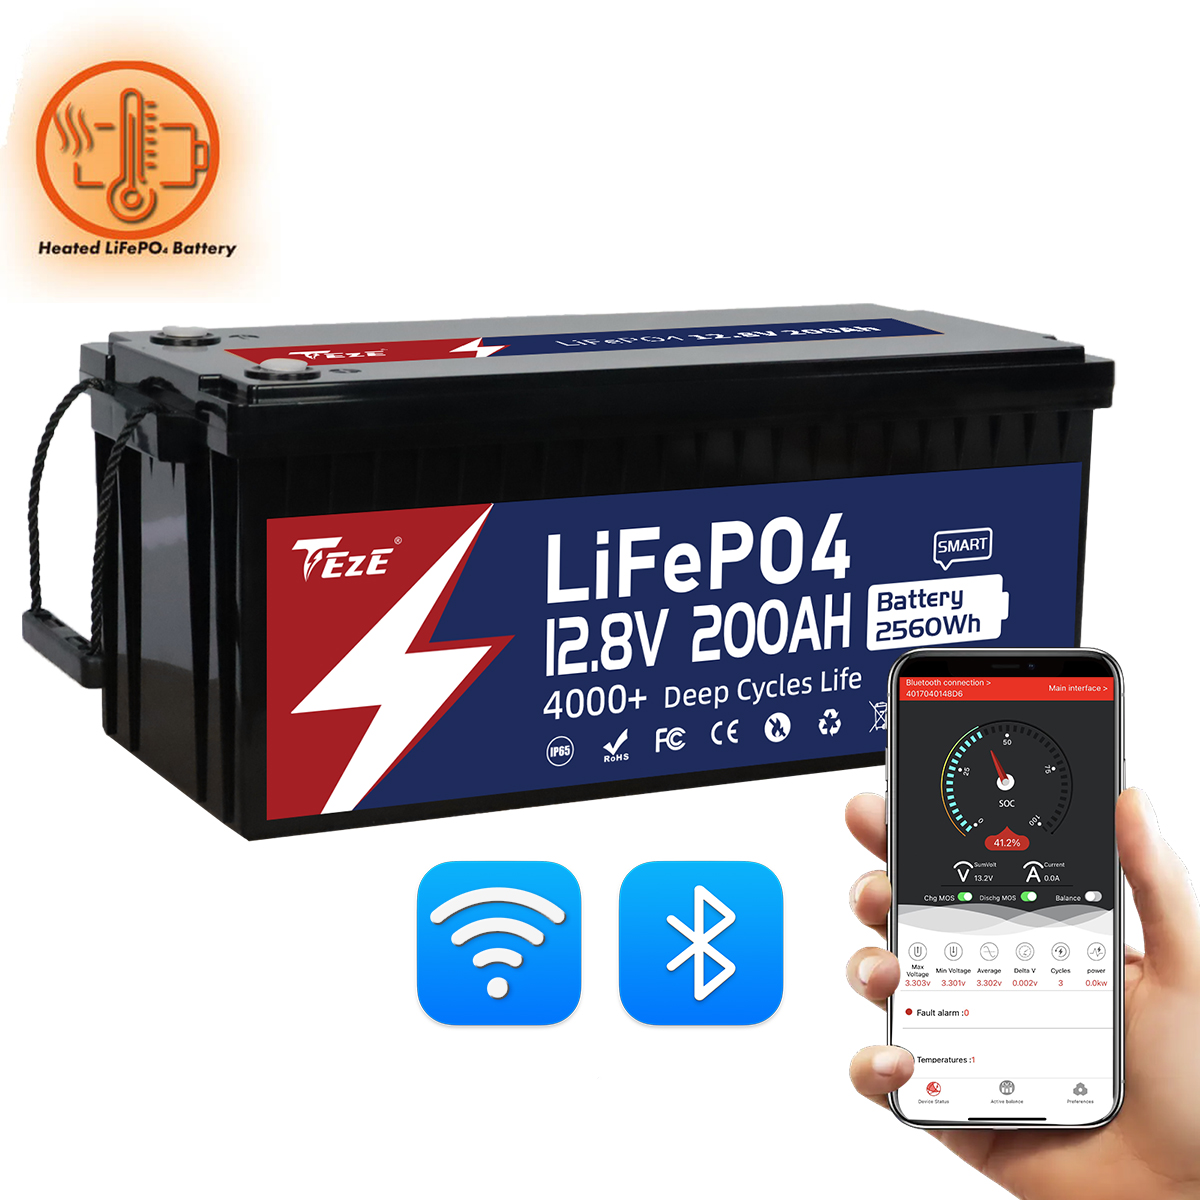 New Add WiFi-TezePower 12V 200Ah LiFePO4 Battery with WIFI and Bluetooth, Self-heating and Active Balancer, Built-in 200A Daly BMS(WIFI Built-in Version)